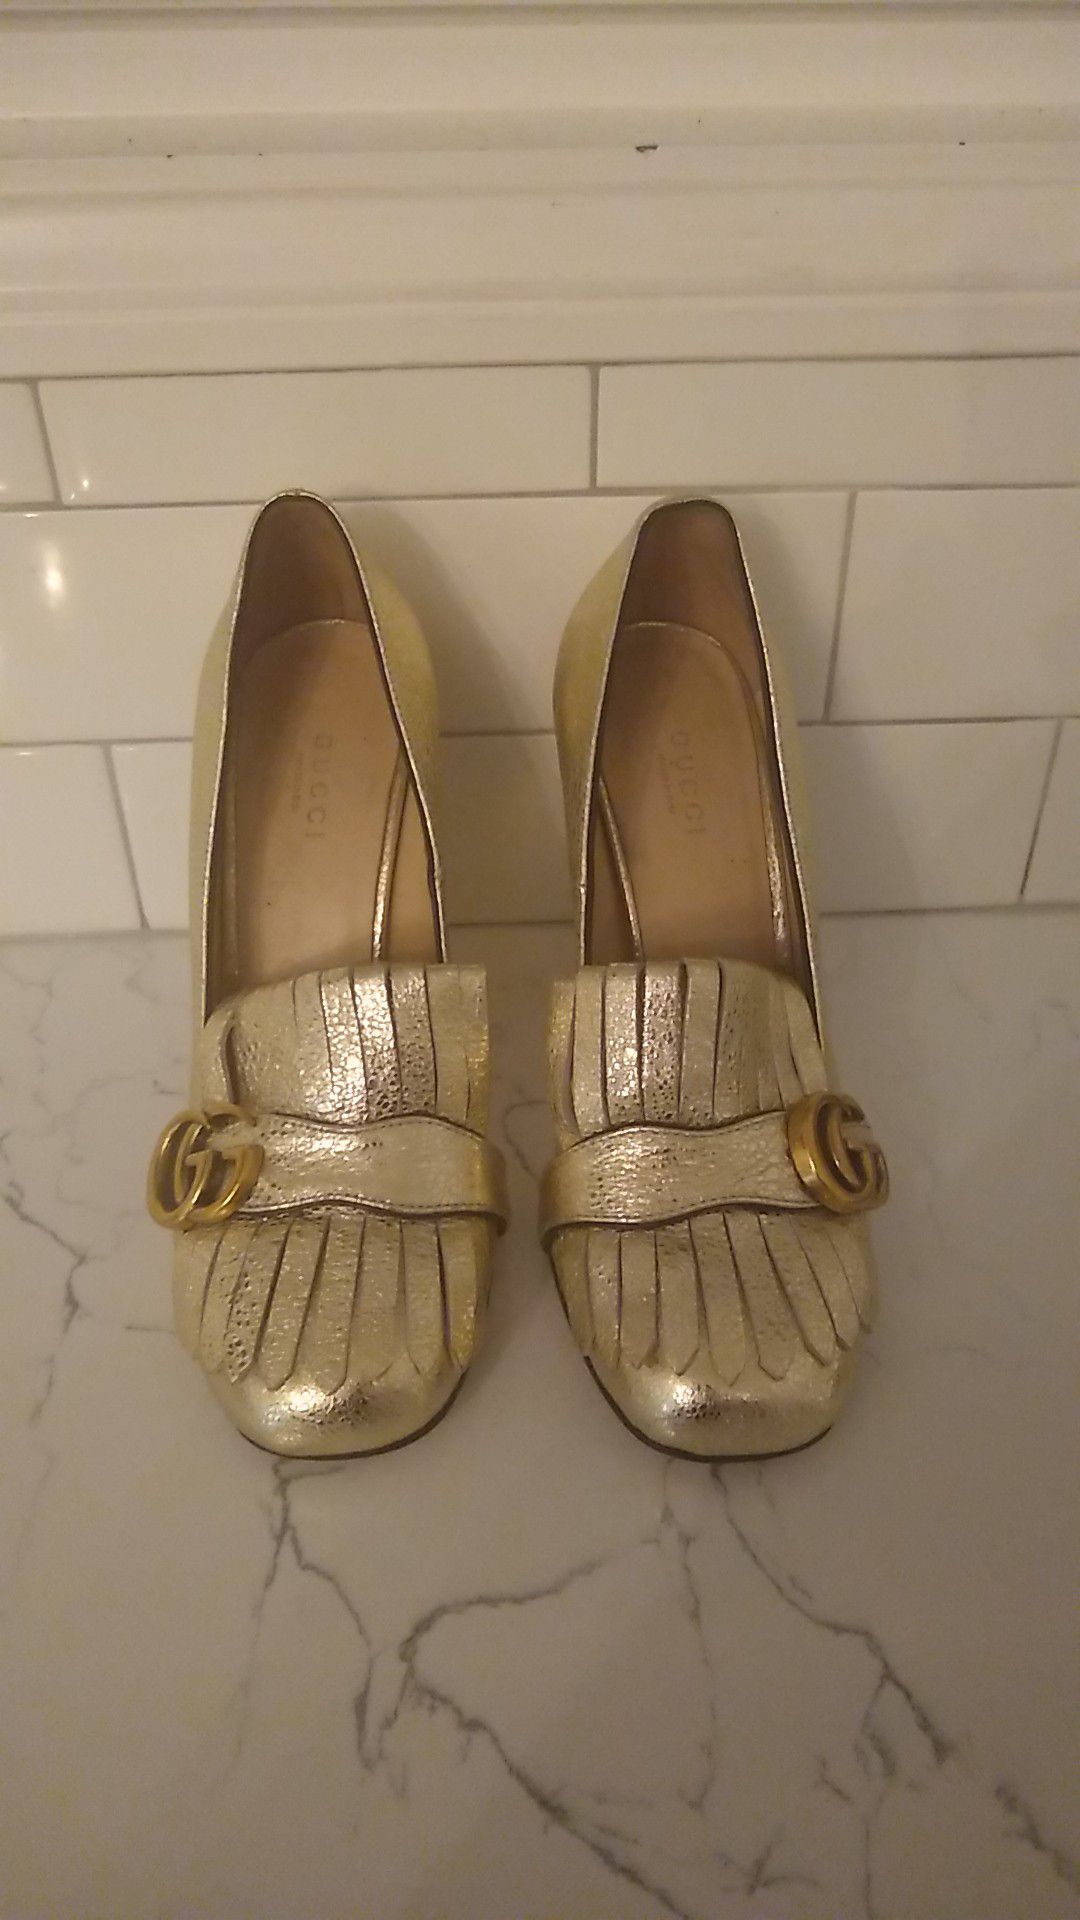 Gucci marmont gold loafers